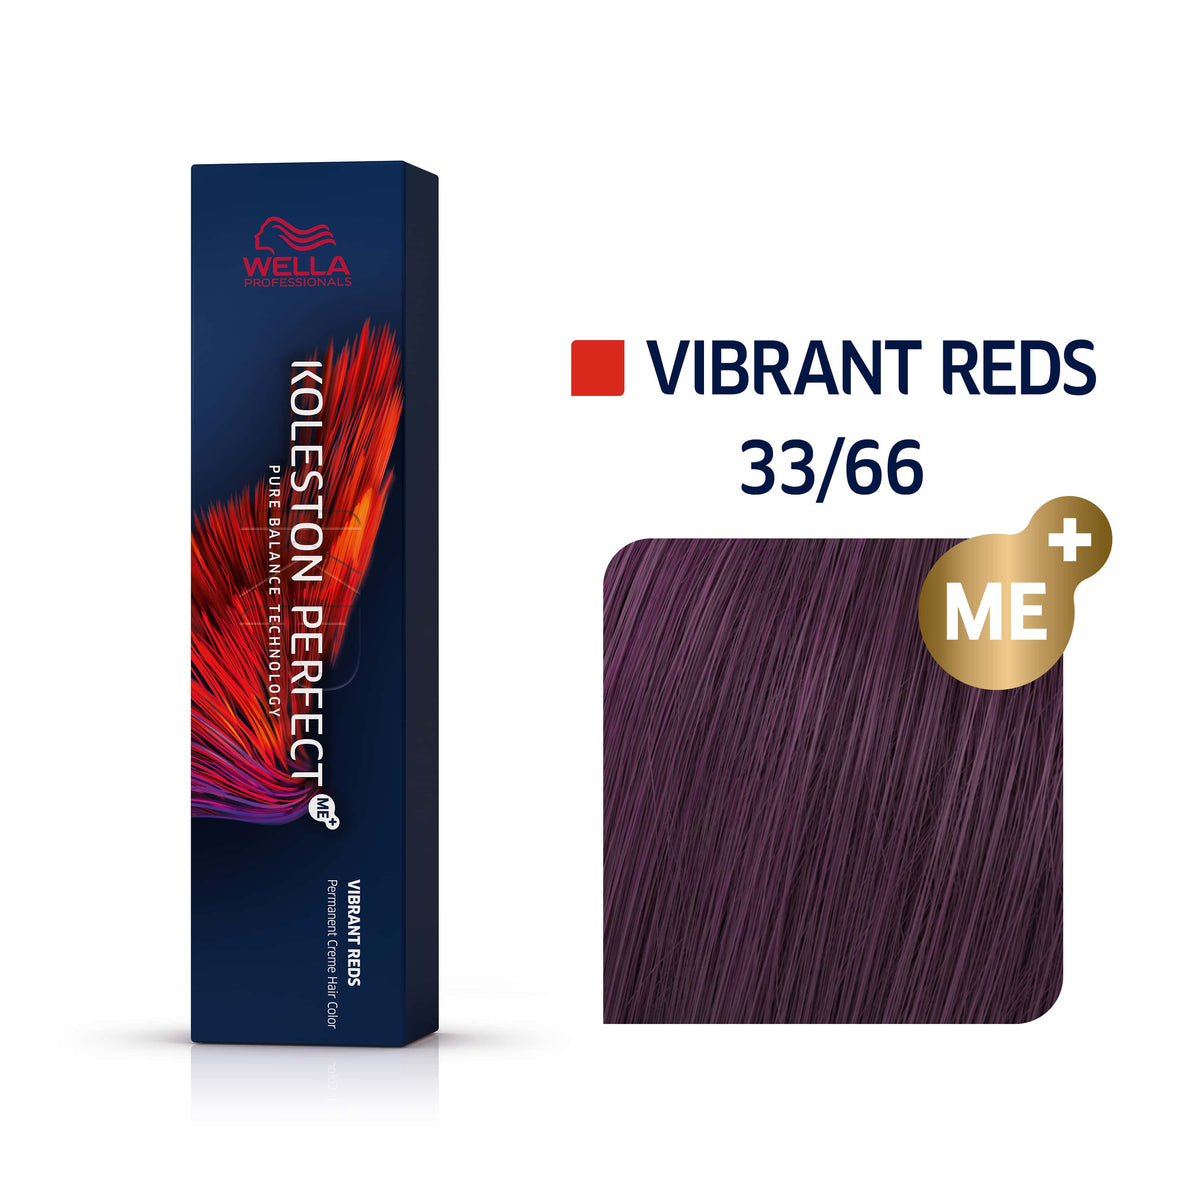 a box of wella vibrant reds permanent hair color